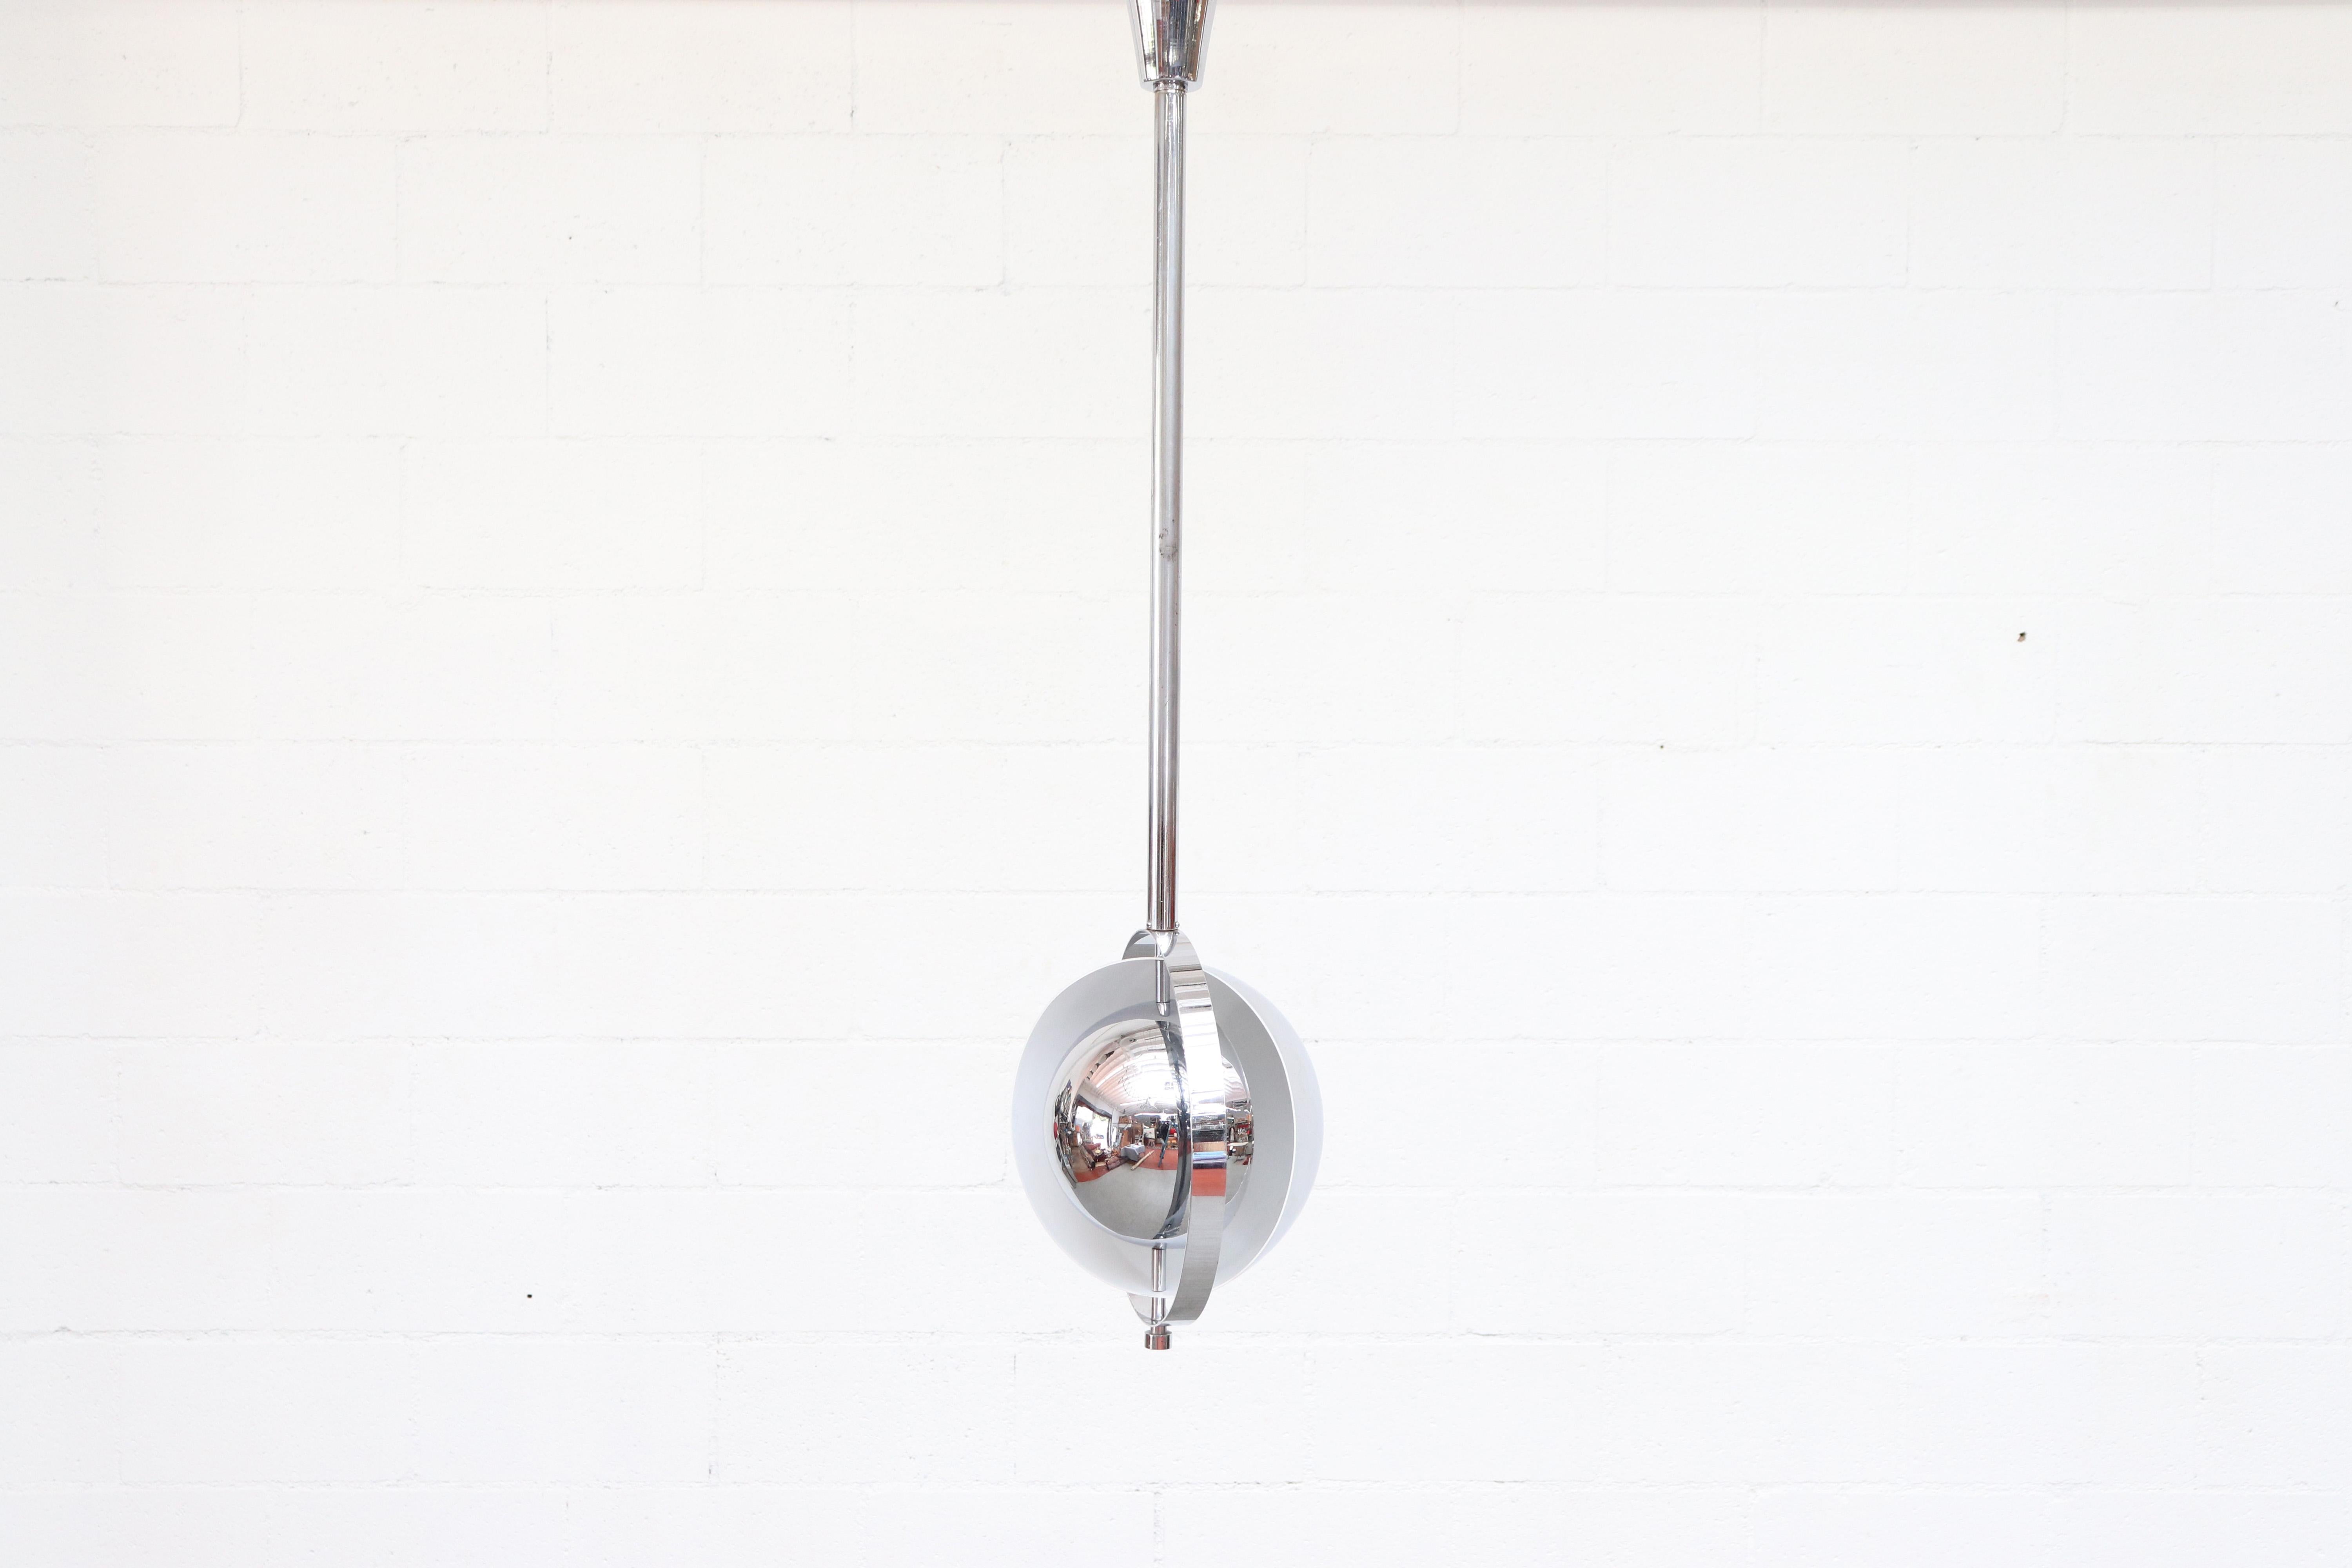 Cool chrome hanging Henri Matthieu style orbit light. Rotating chrome ring and half-moon domes as well as height adjustable!!! Original condition with nice patina to the chrome. One slight dent in the outer shell.